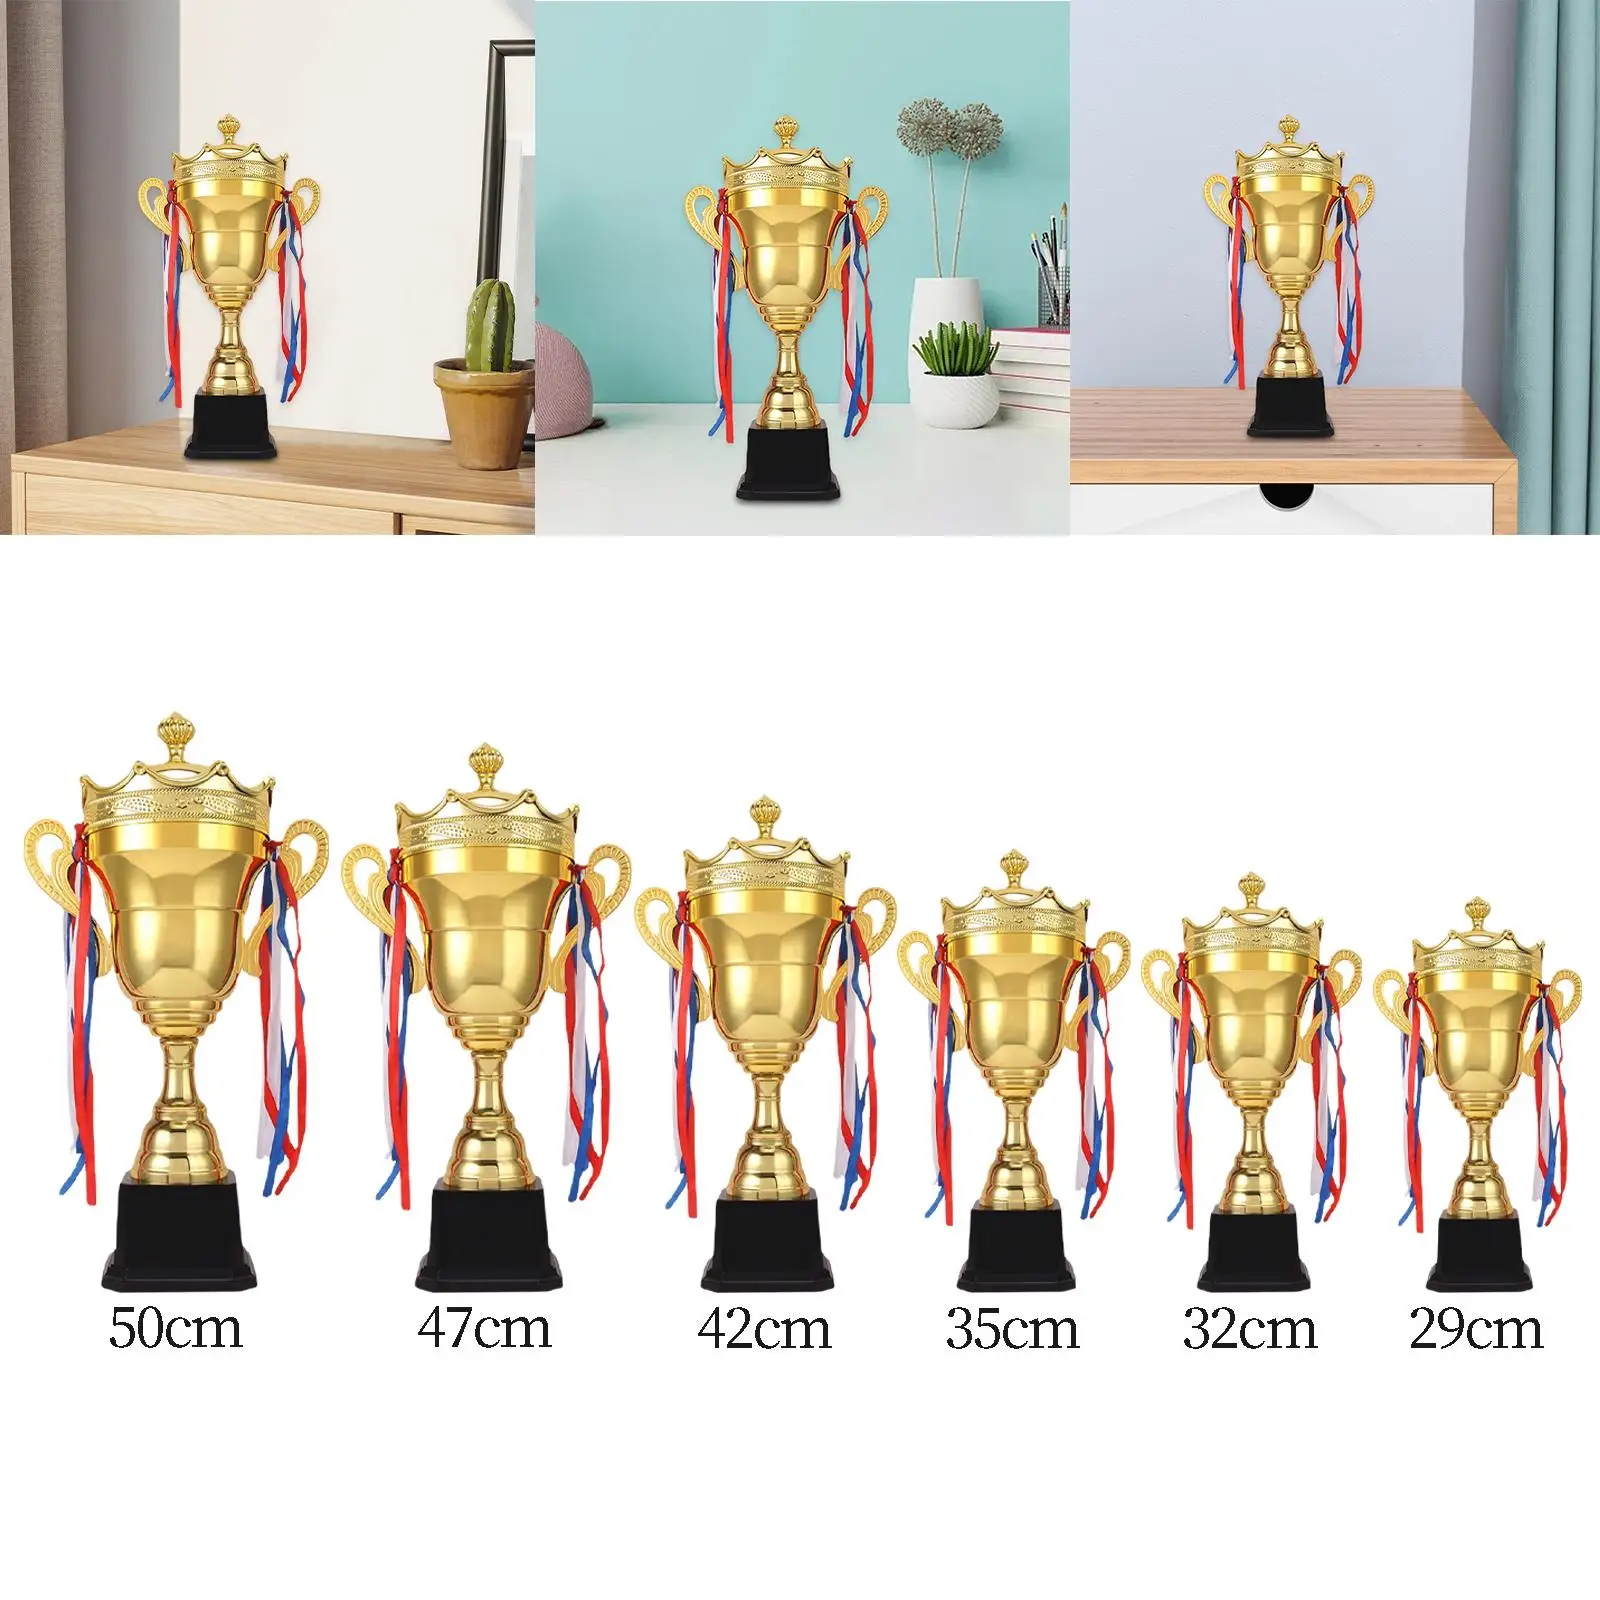 Trophy Cup Decorations Keepsake for Award Competitions Sports Championships School Tournaments Soccer Football League Match